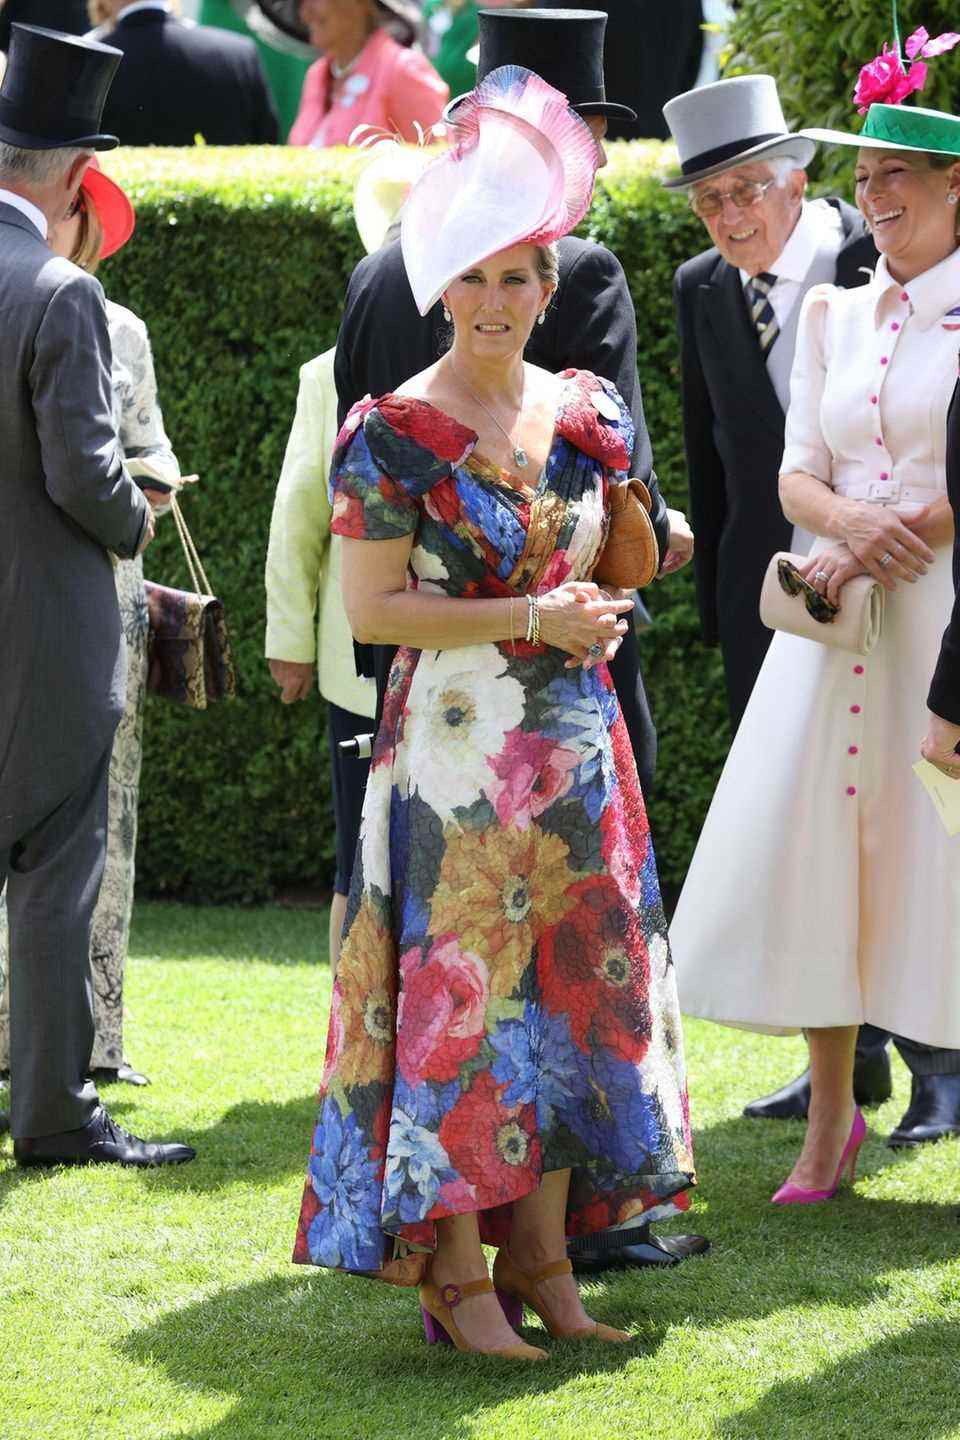 Countess Sophie of Wessex at the horse races at Ascot on 16 June 2022.